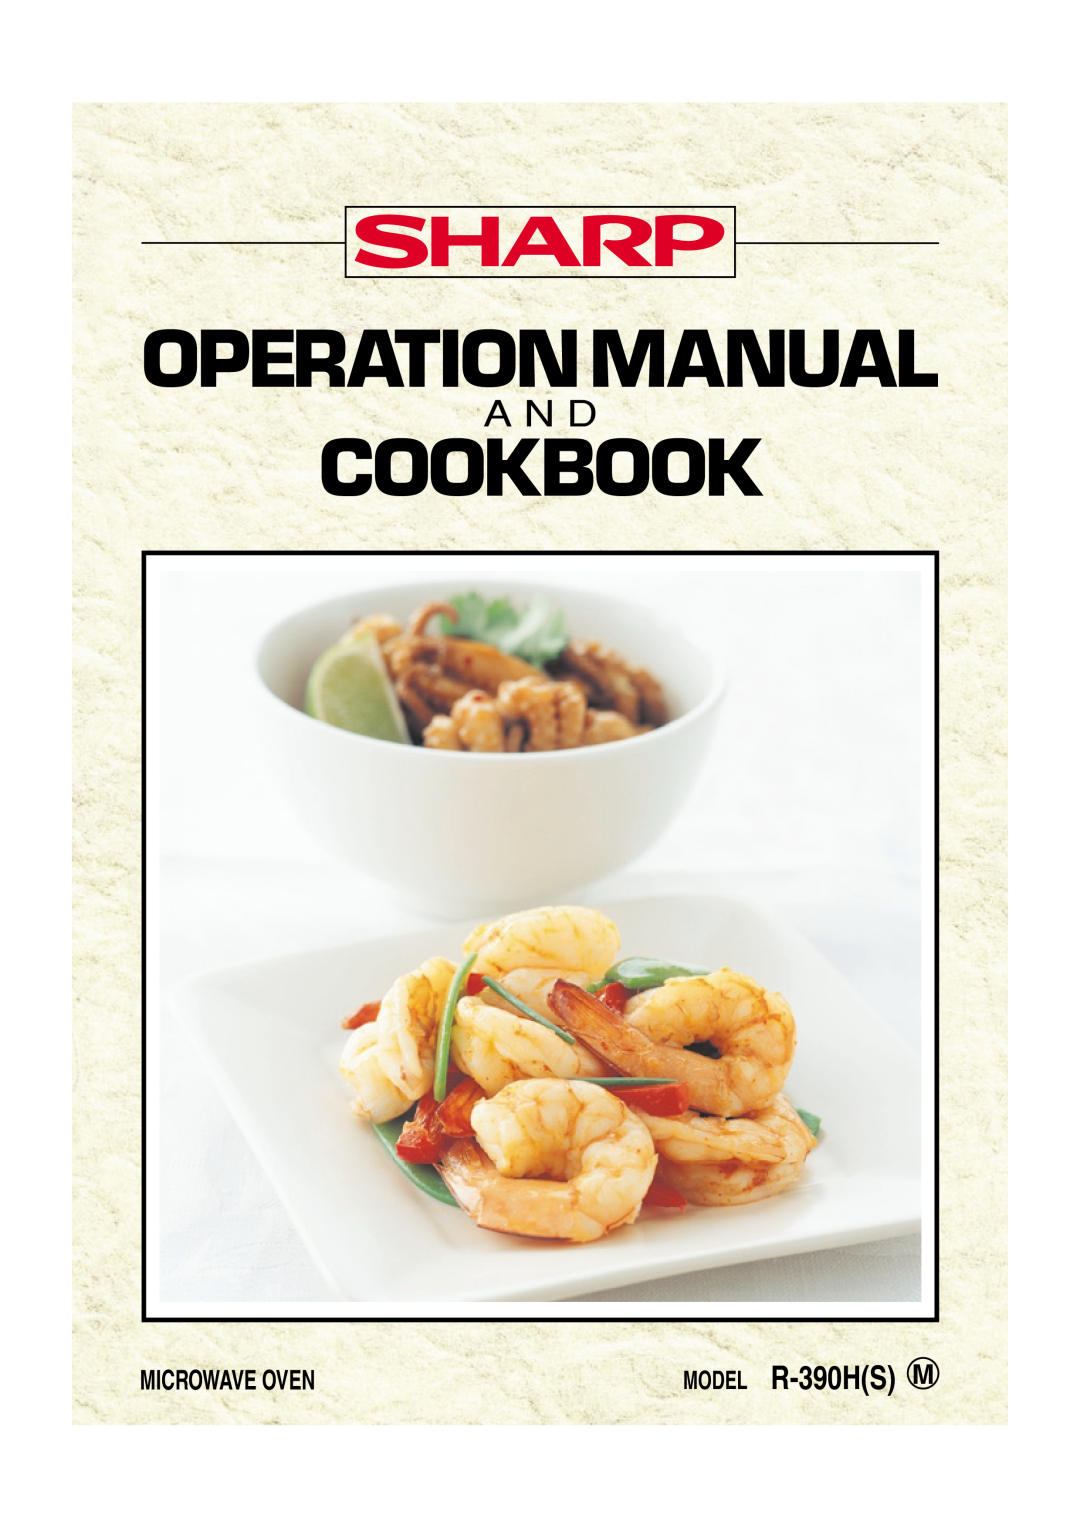 Sharp R-390H(S) operation manual Microwave Oven, Operationmanual, Cookbook, A N D, MODEL R-390HS M 